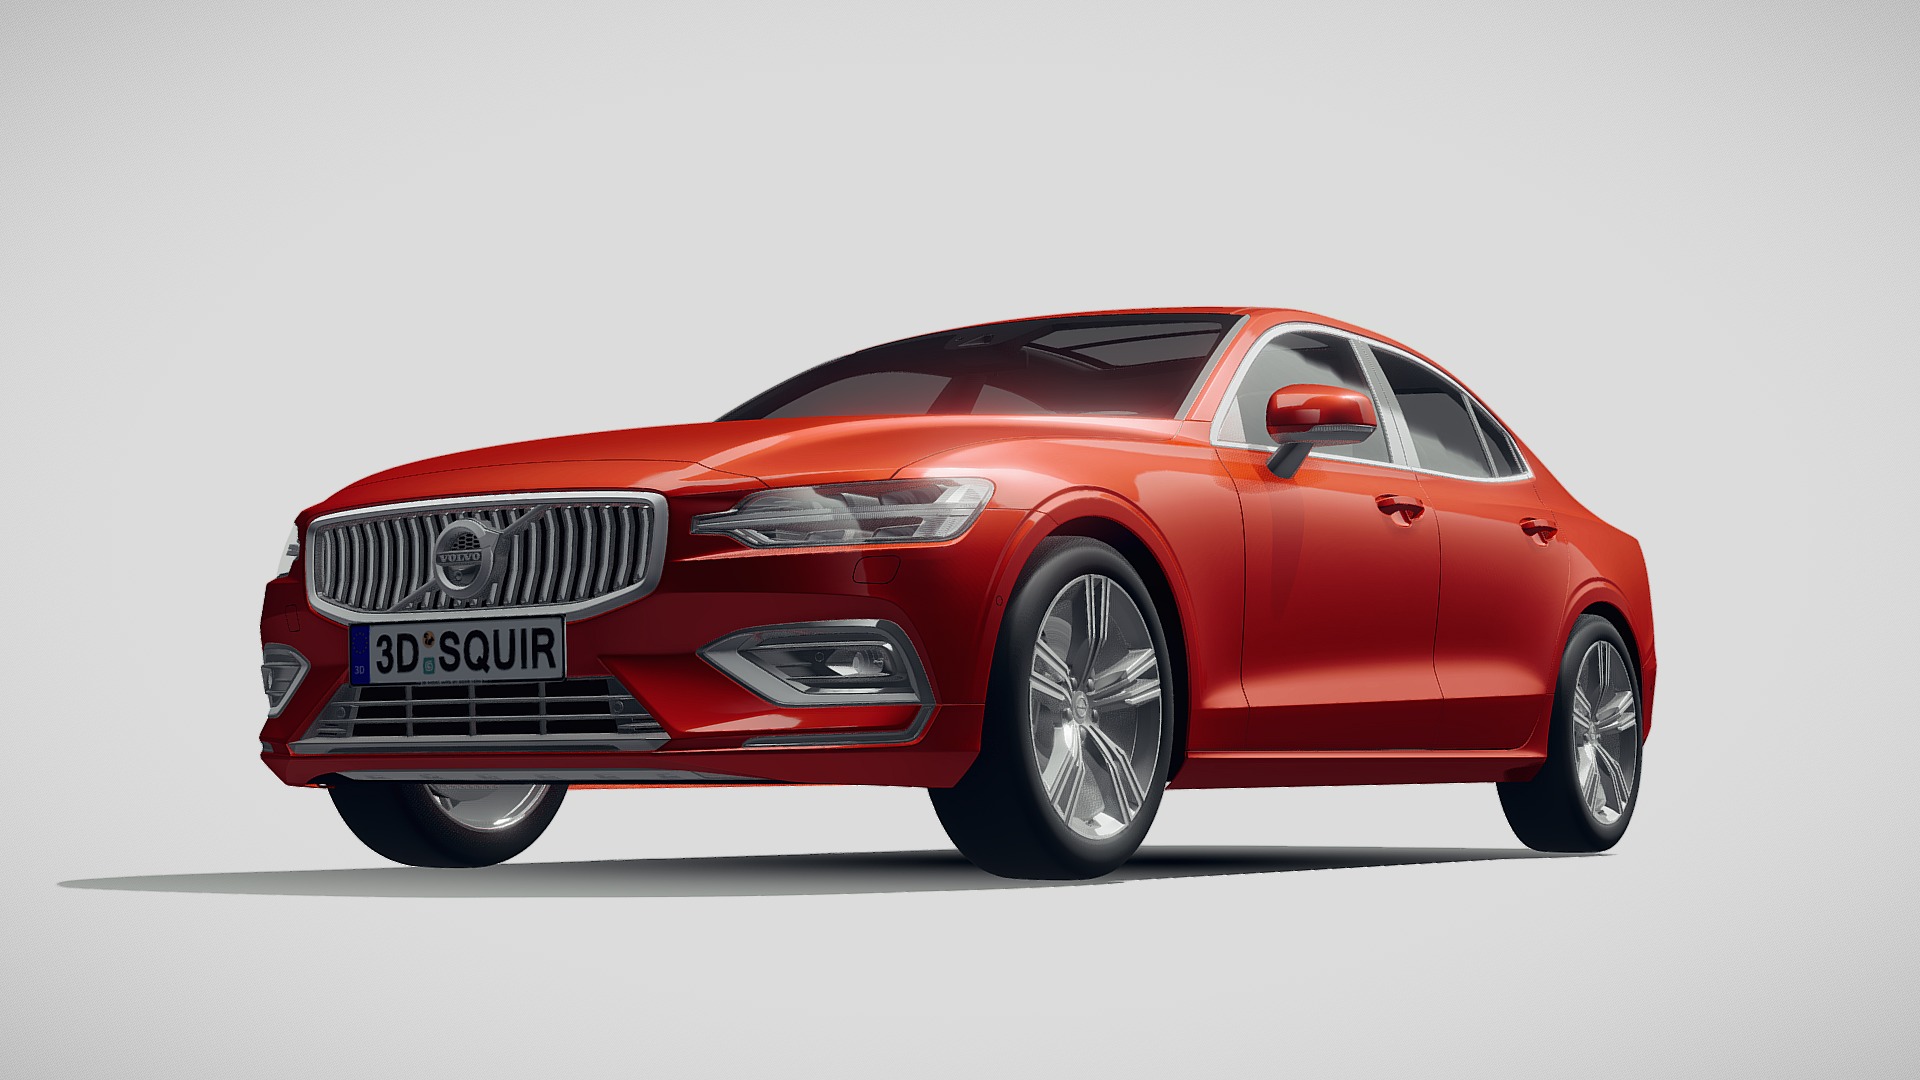 3D model Volvo S60 2019 - This is a 3D model of the Volvo S60 2019. The 3D model is about a red car with a white background.